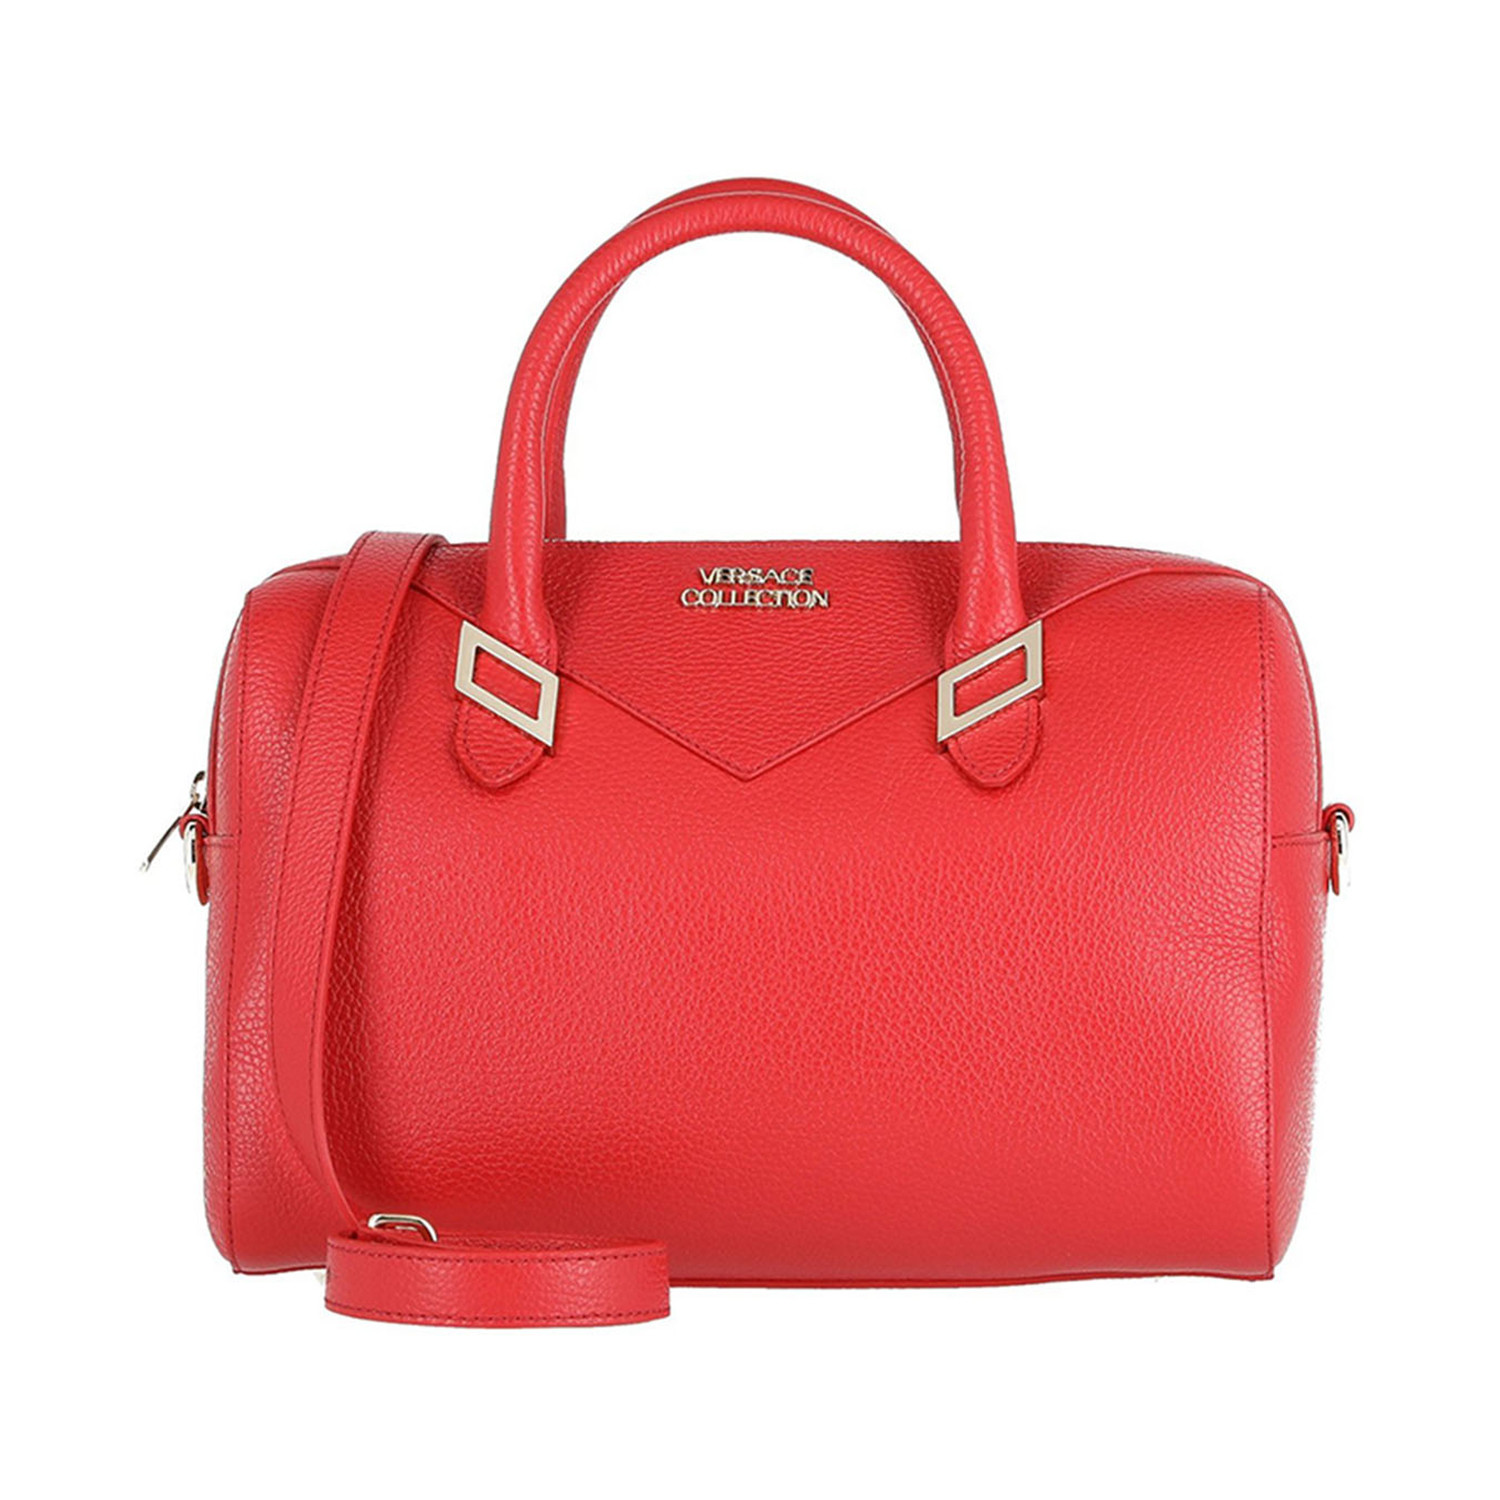 Boxed Shoulder Handbag // Red - Versace Collection - Touch of Modern